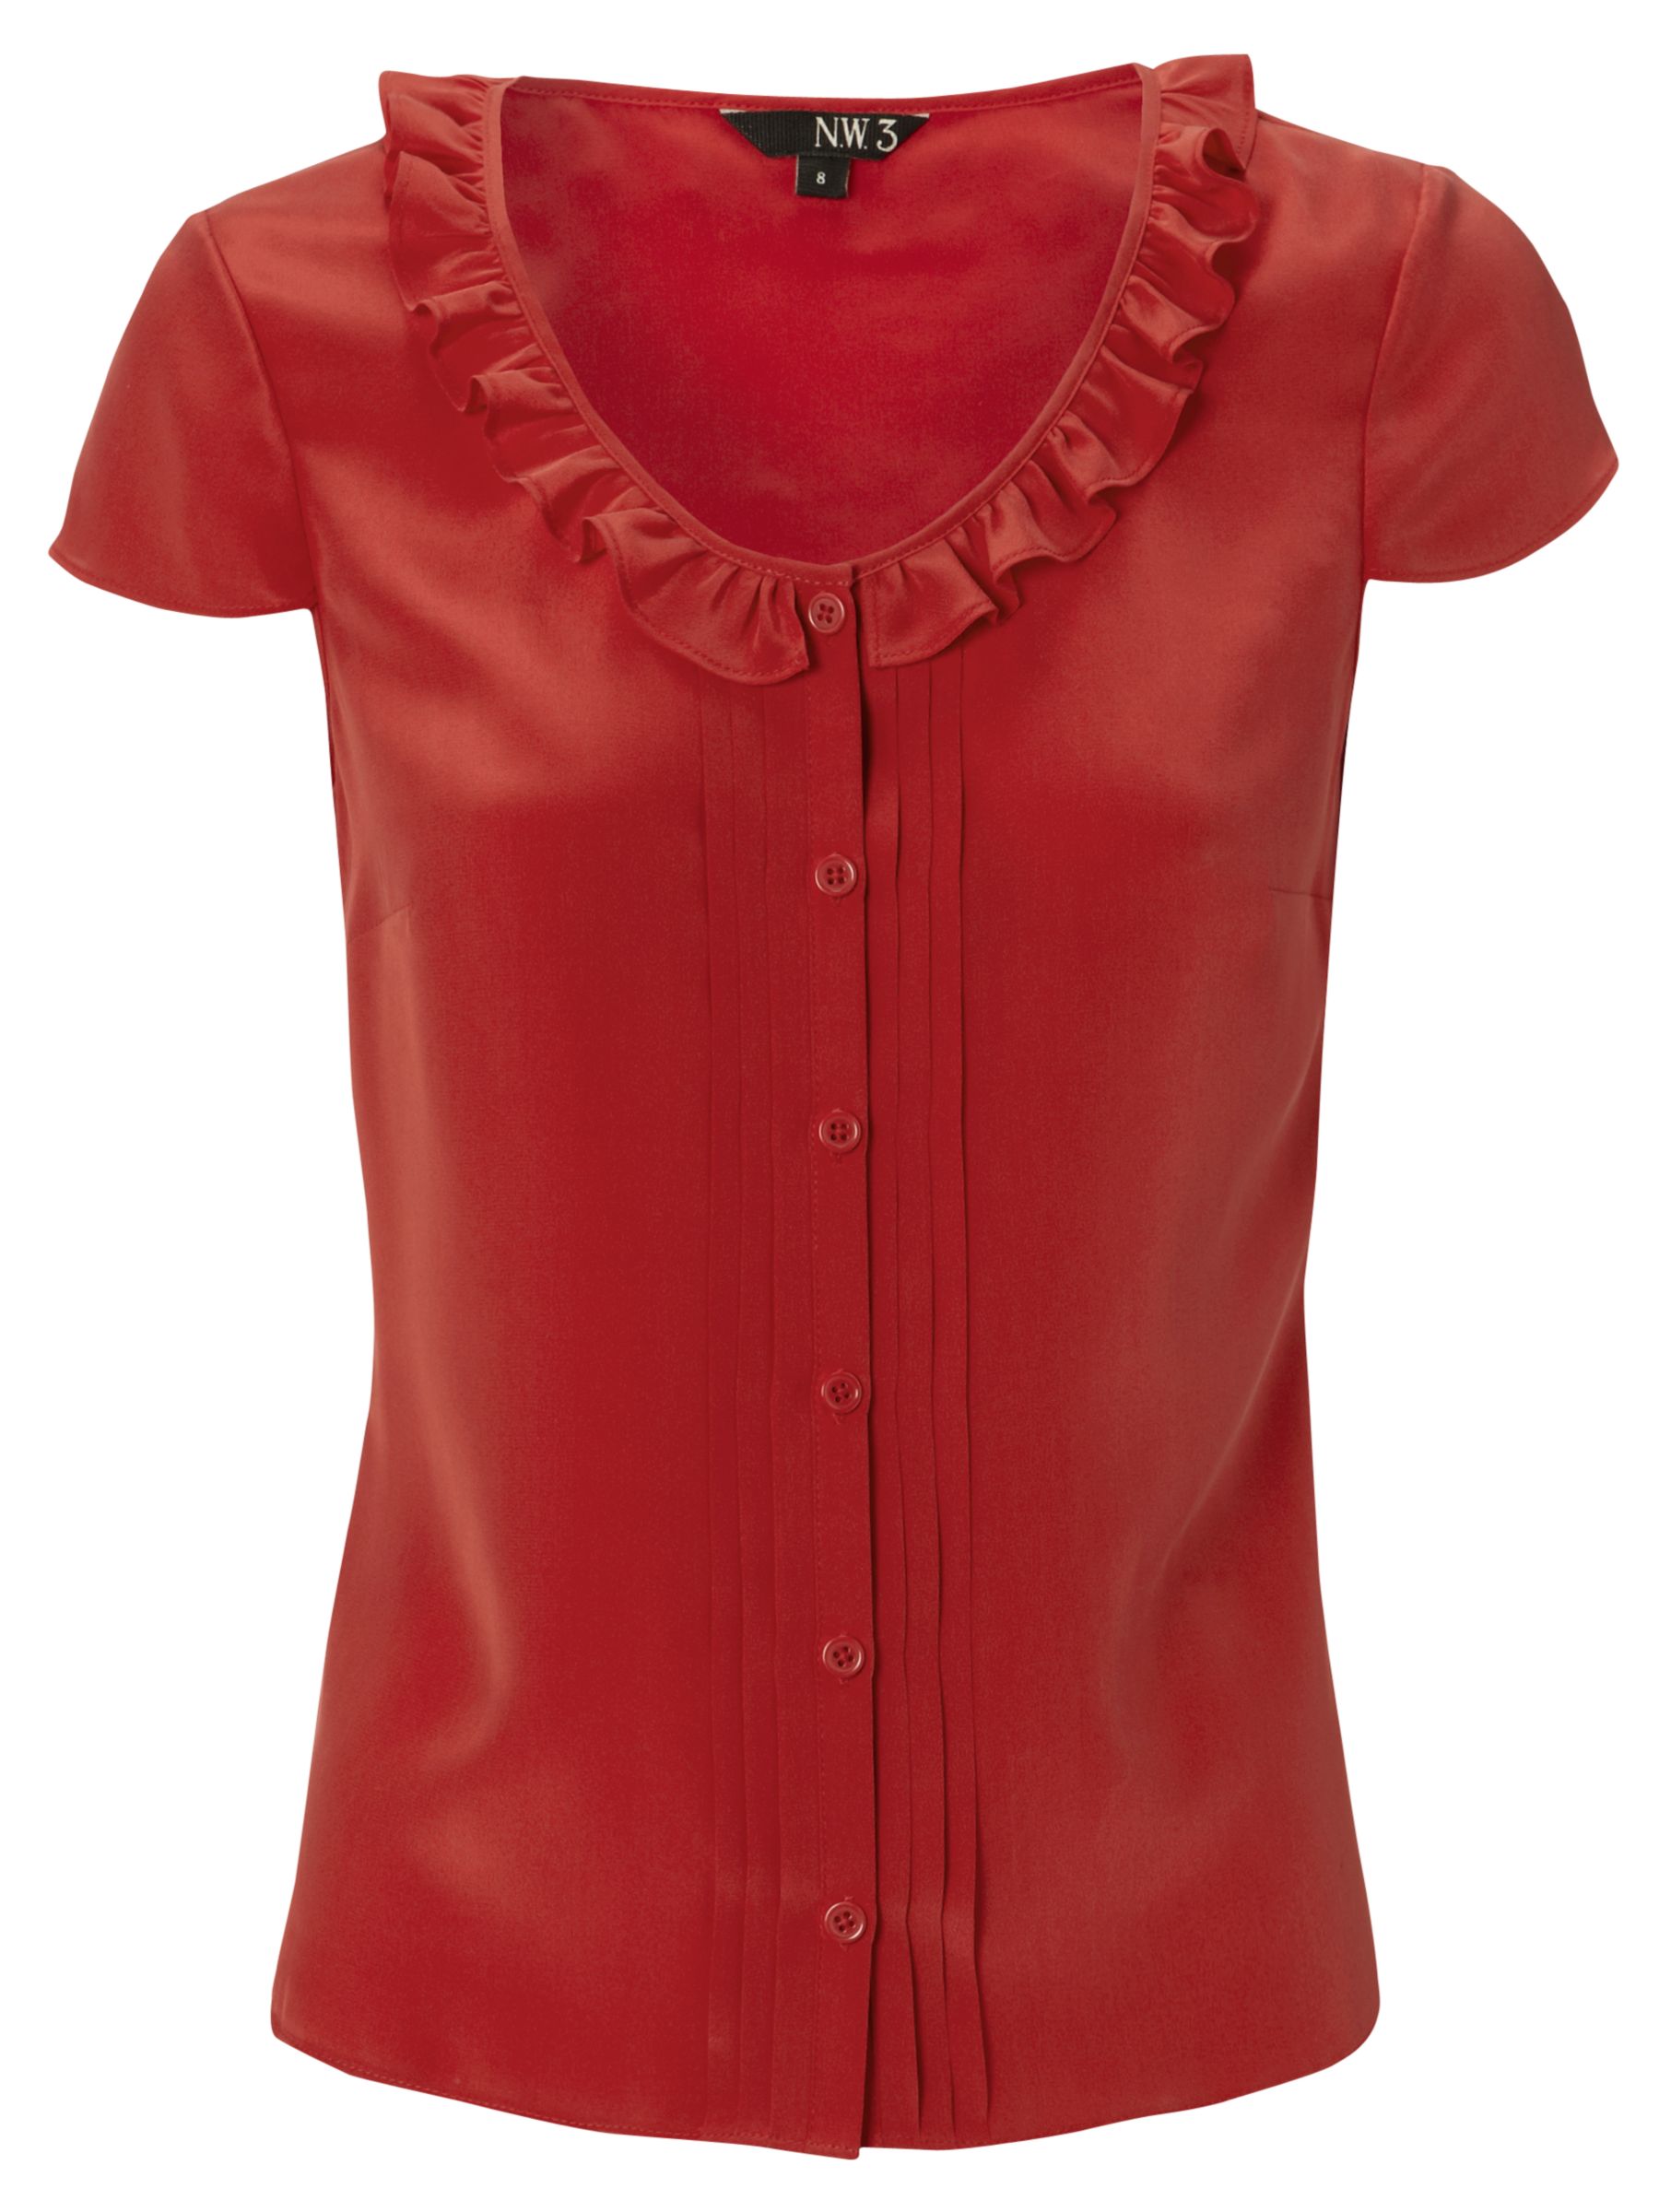 NW3 Frill Blouse, Admiral Red